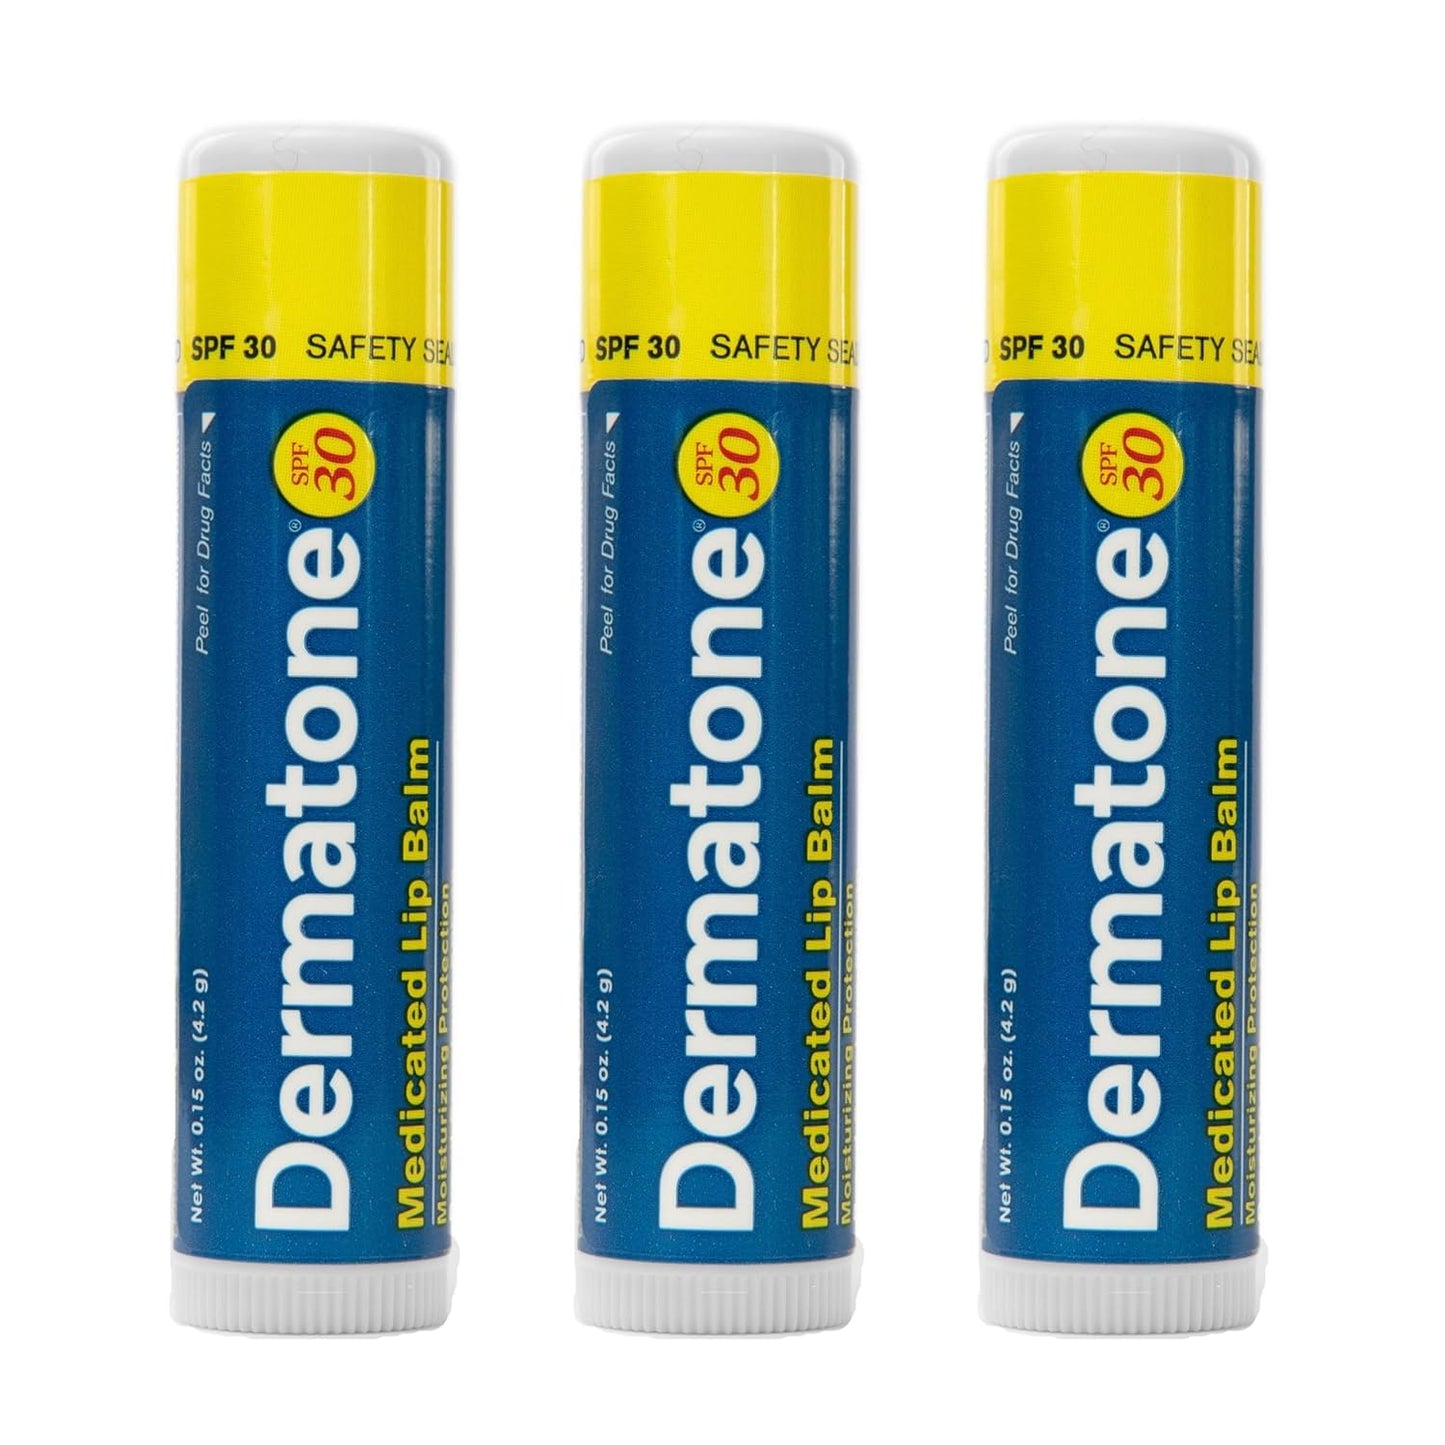 Dermatone Lip Balm SPF 30 | Moisturizing | Medicated | Formulated to Soothe & Replenish Chapped & Cracked Lips (0.15 oz sticks, Pack of 3)